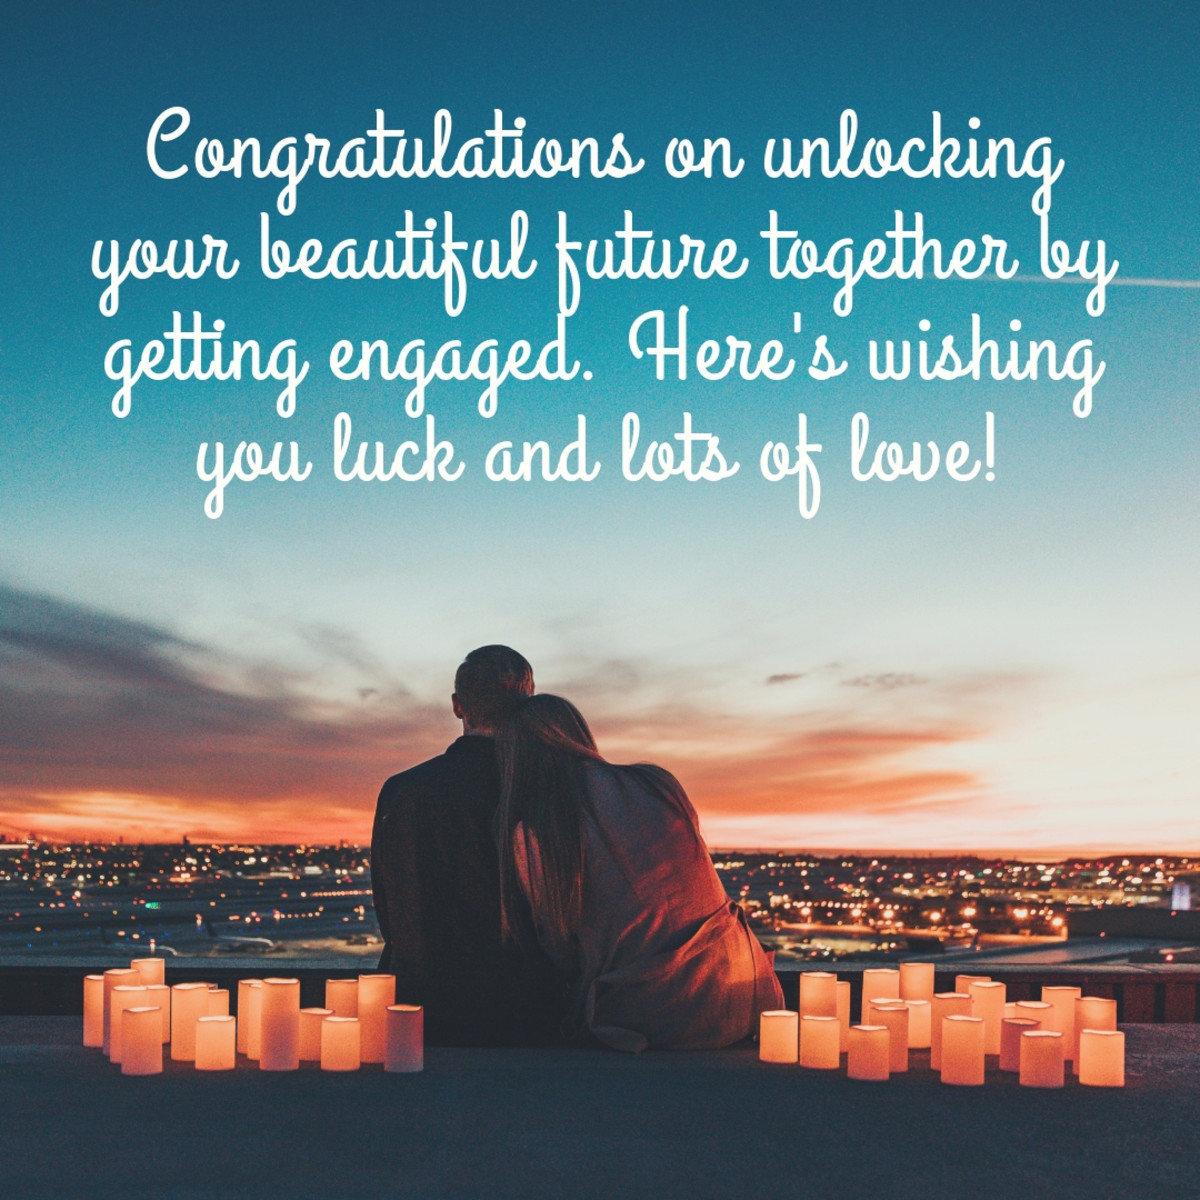 Congratulate the happy couple with a card, letter, email, or text to let them know how excited you are about their engagement.